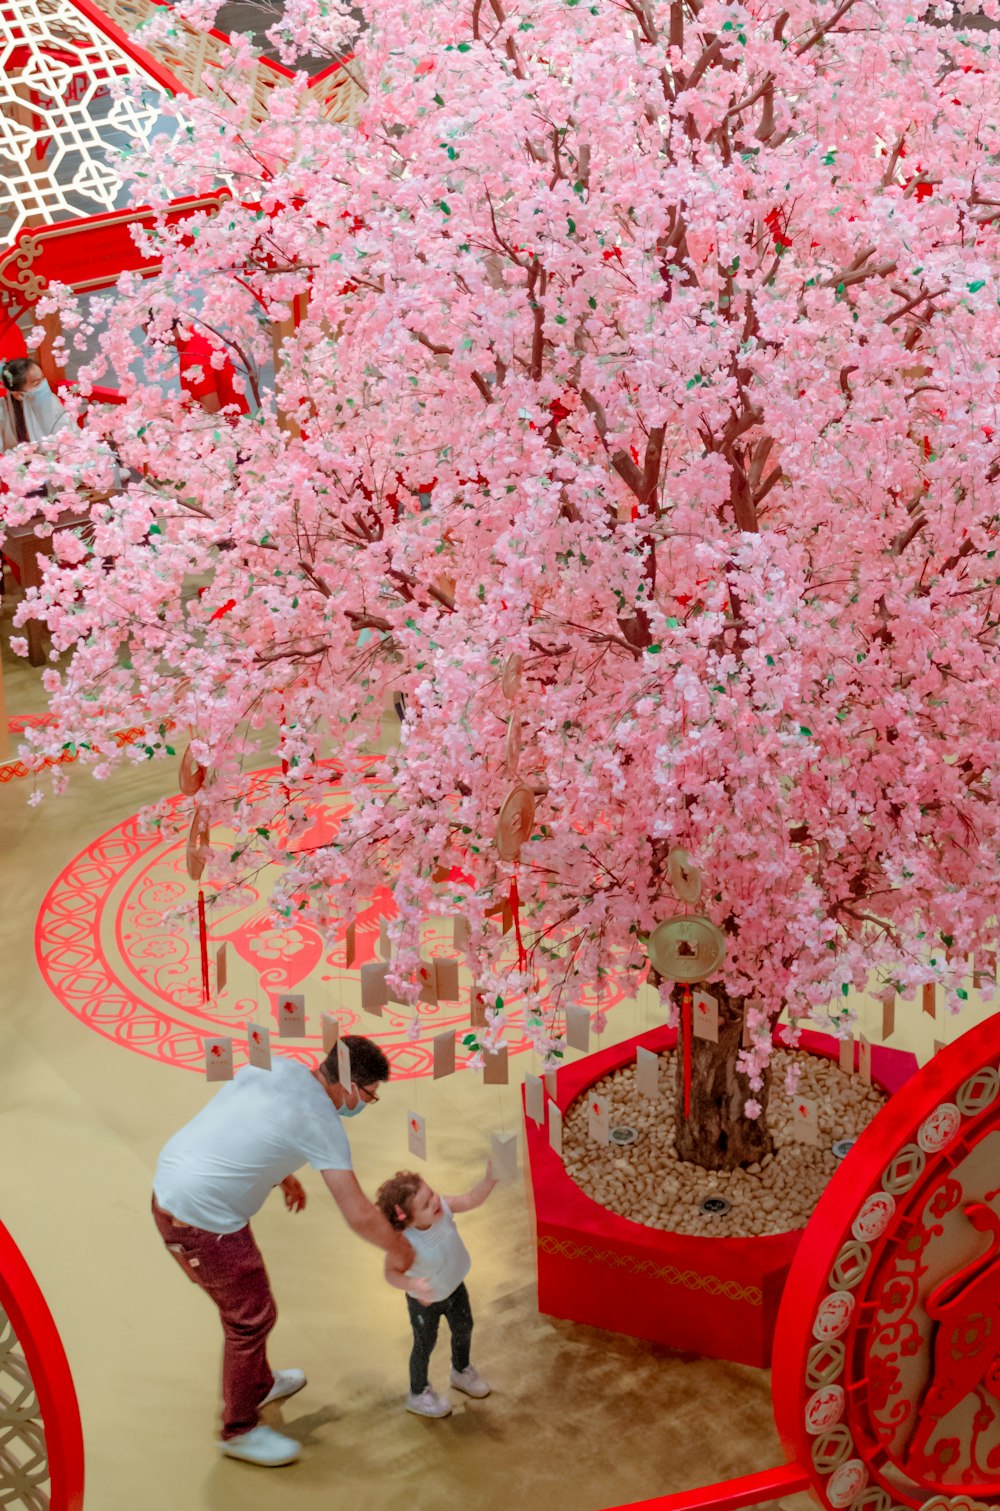 people sitting on red chair under pink cherry blossom tree